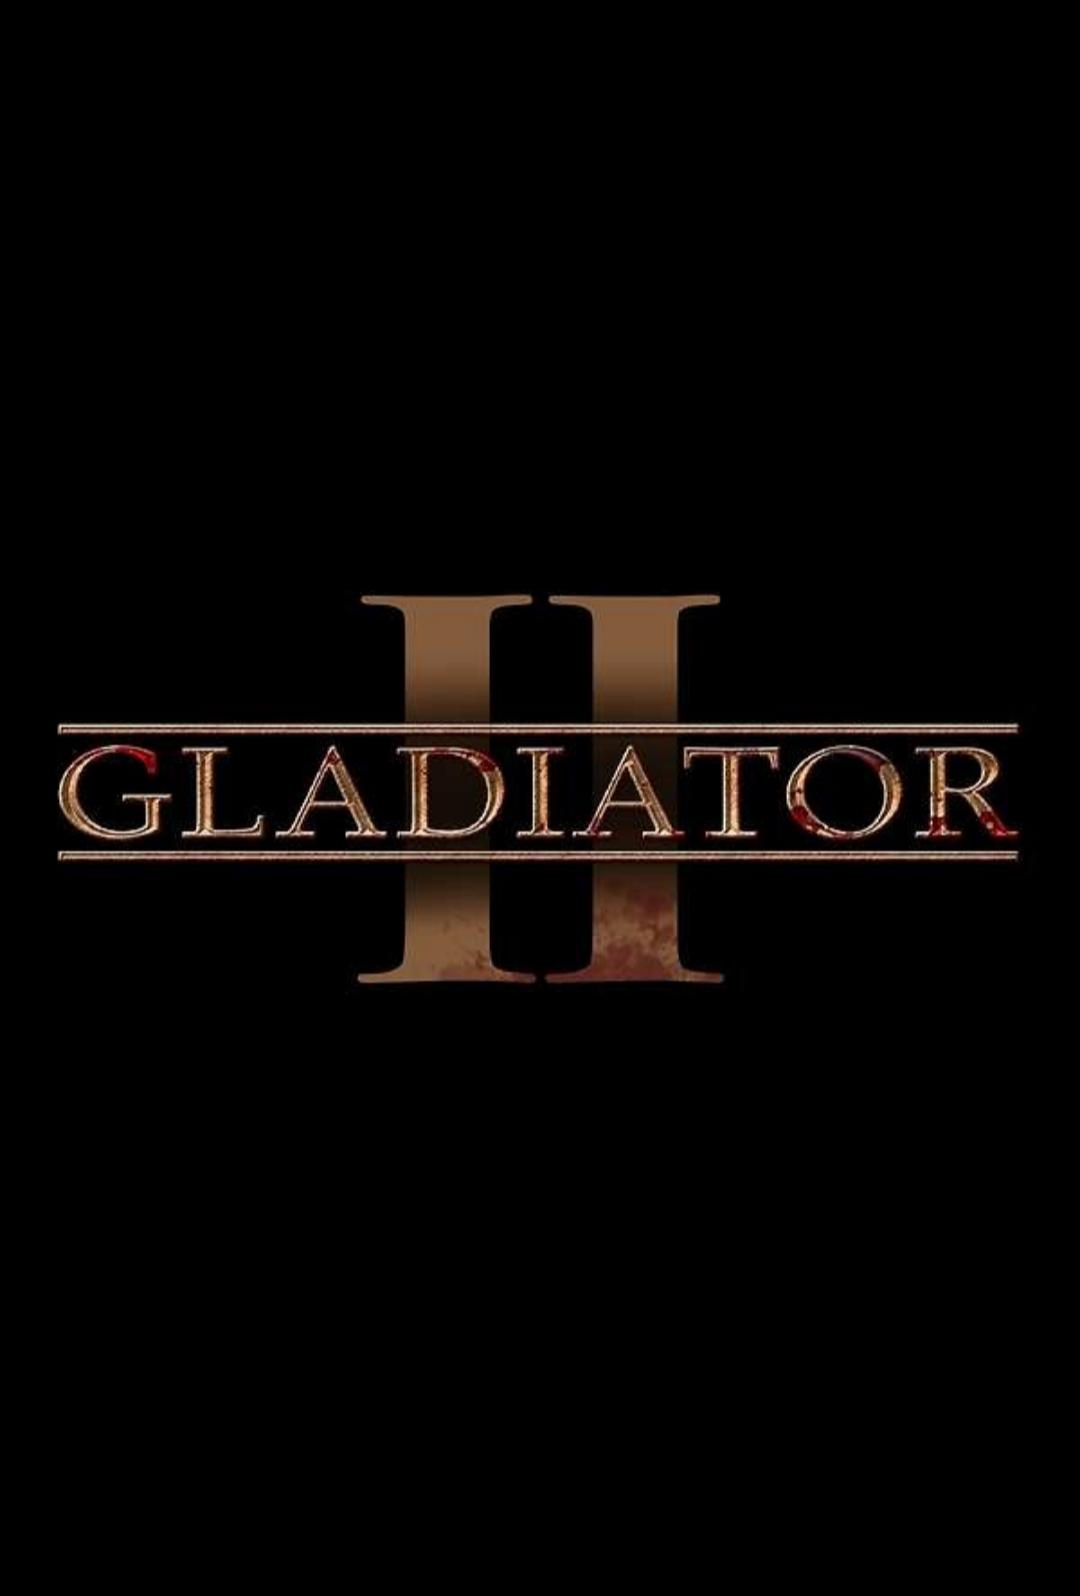 Wicked and Gladiator II Set for Same Release Date This November